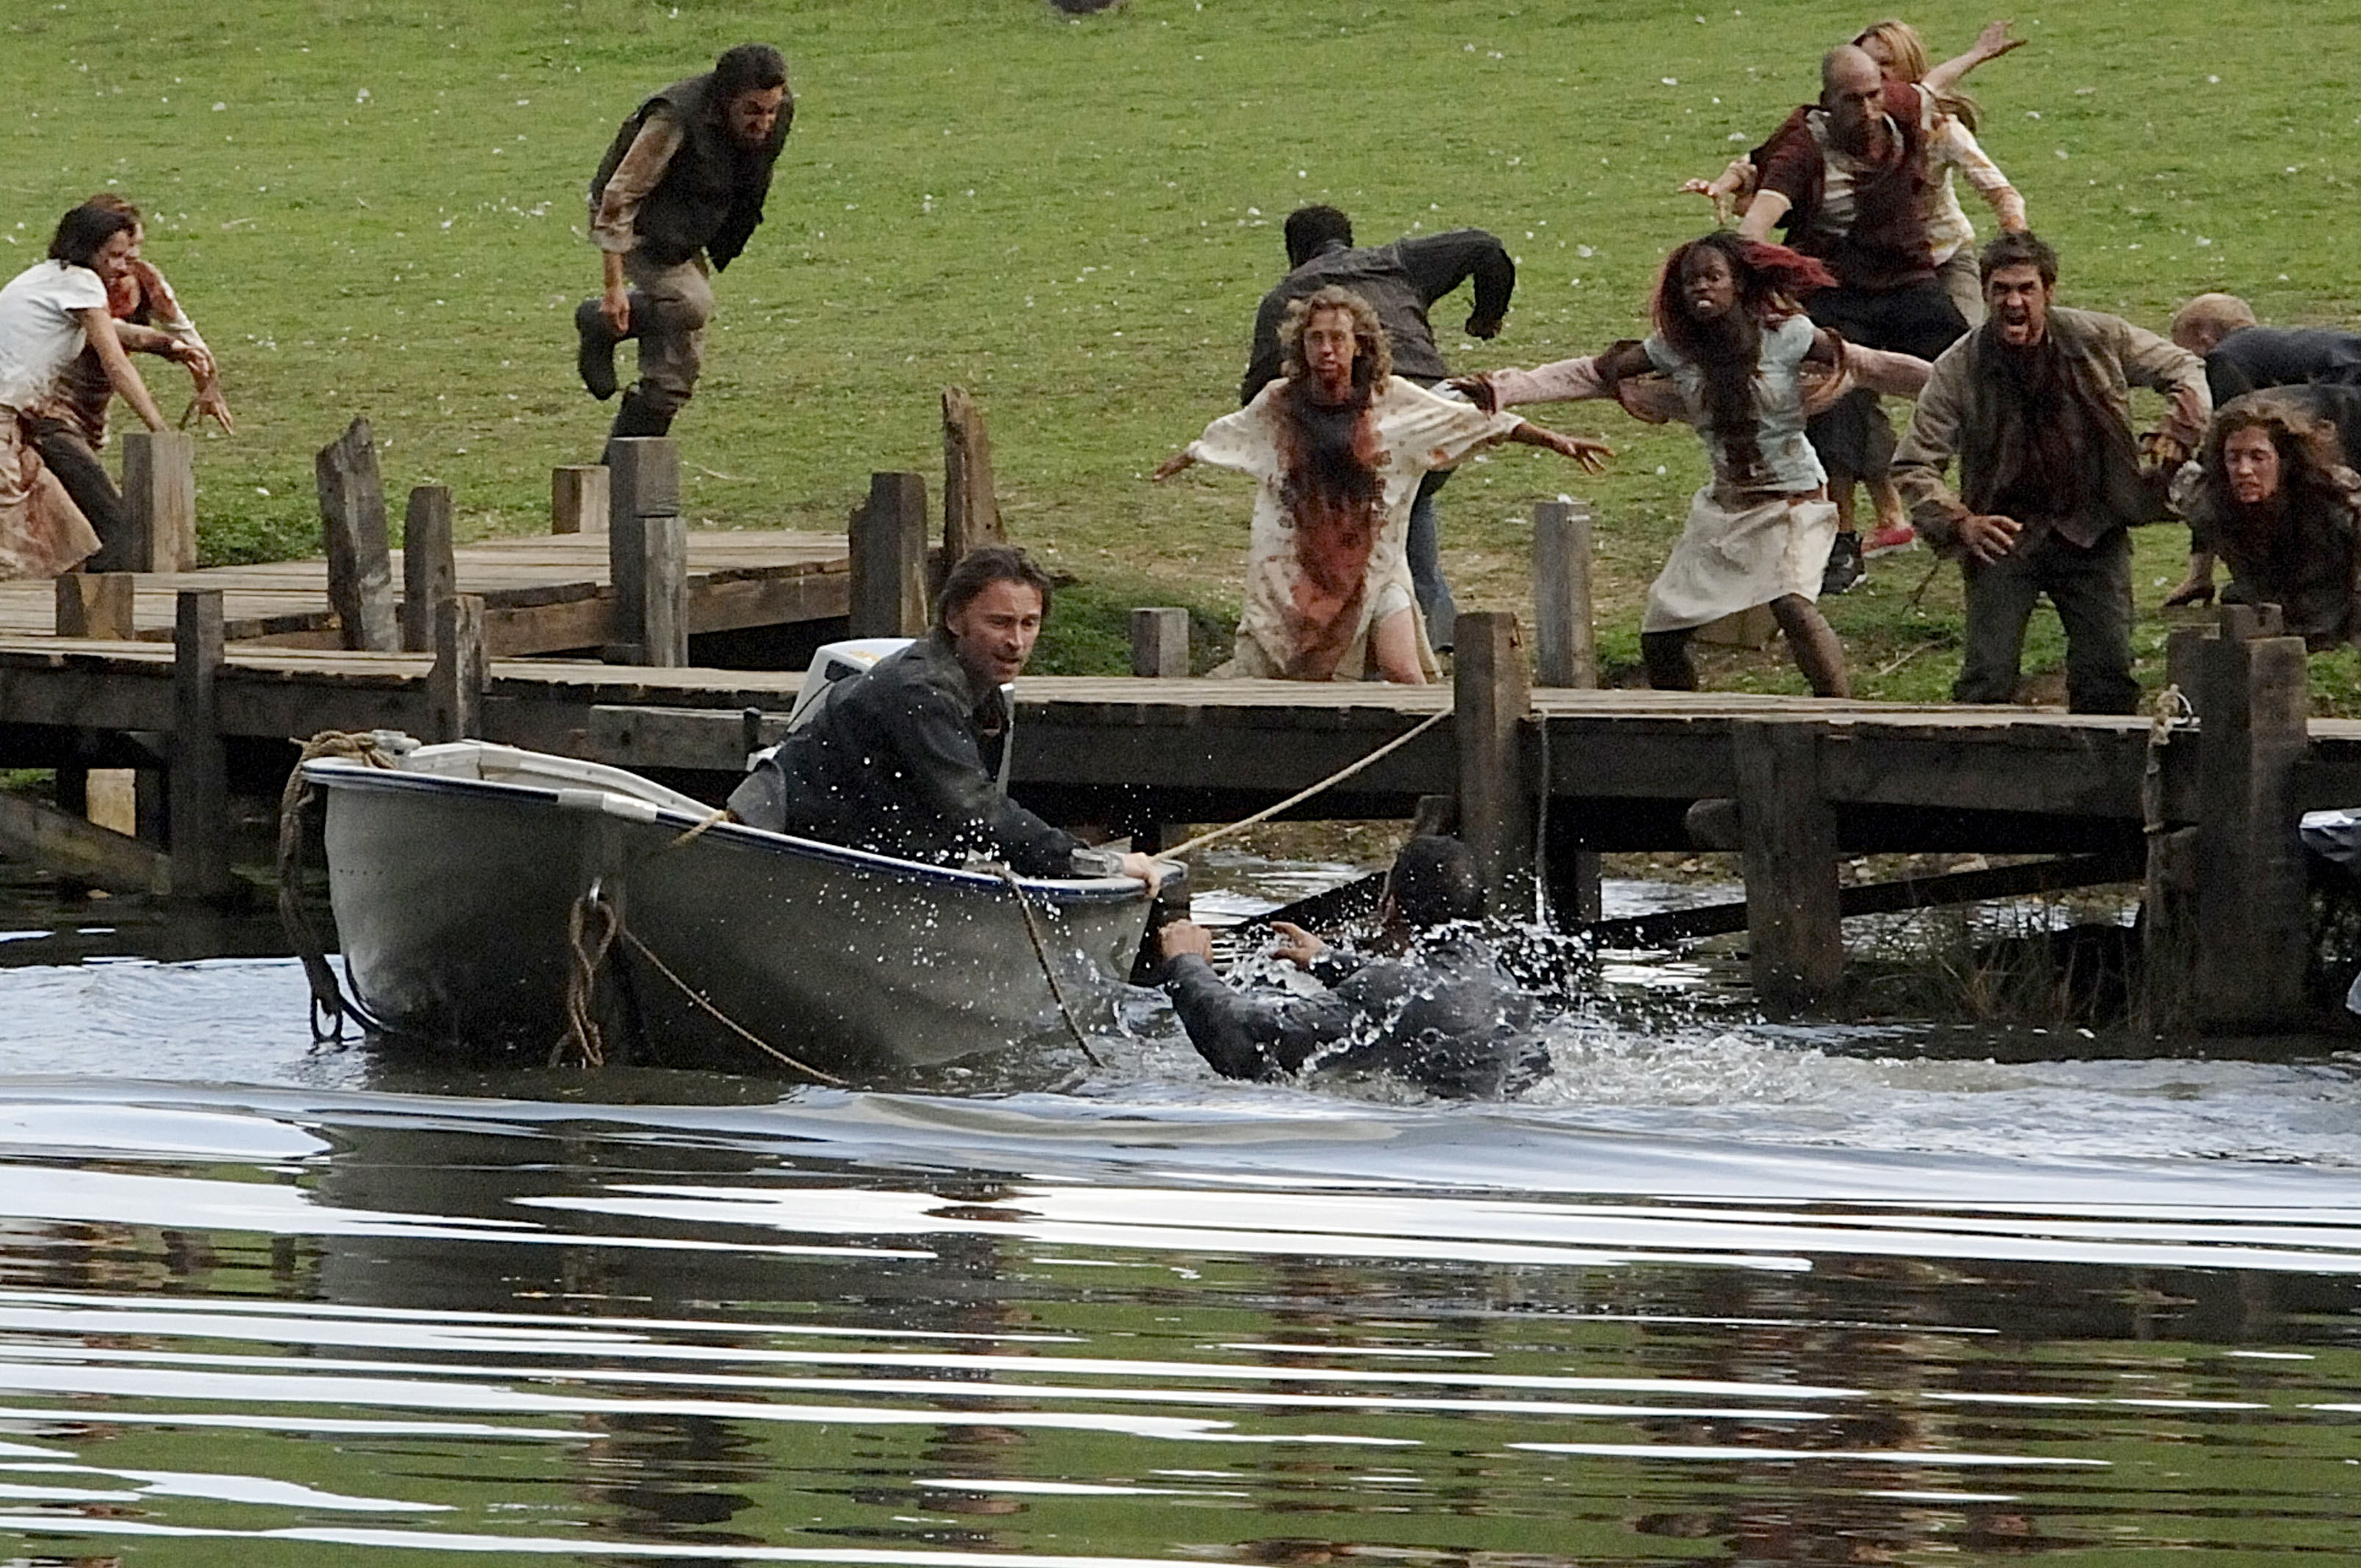 Robert Carlyle narrowly avoids rage-filled zombies descending upon him on a boat near a countryside lake in &quot;28 Weeks Later&quot;